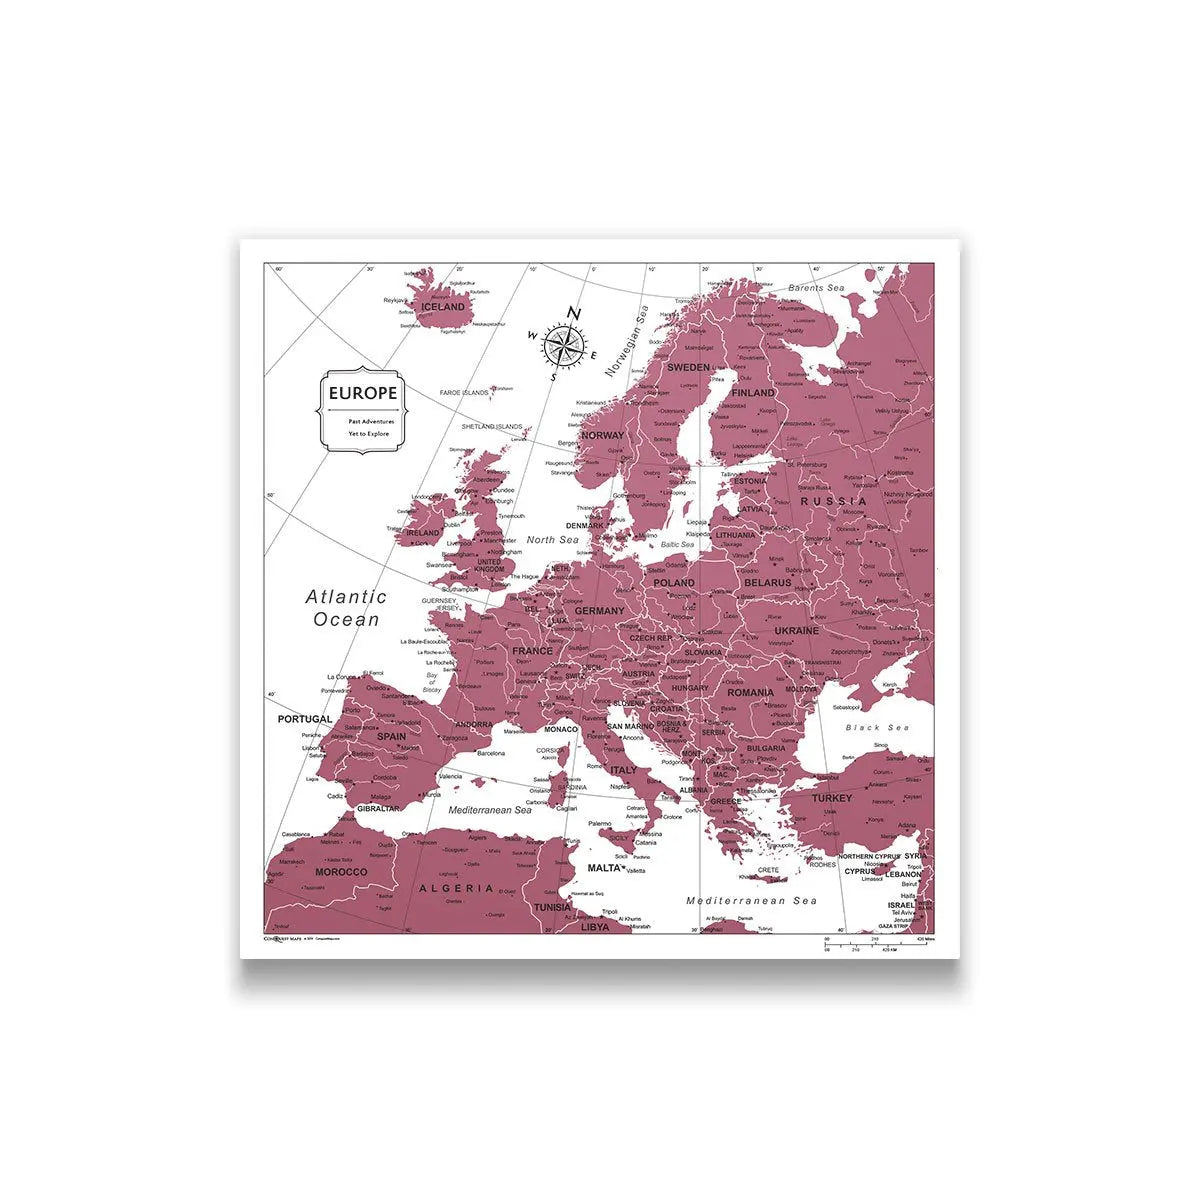 Europe Poster Maps